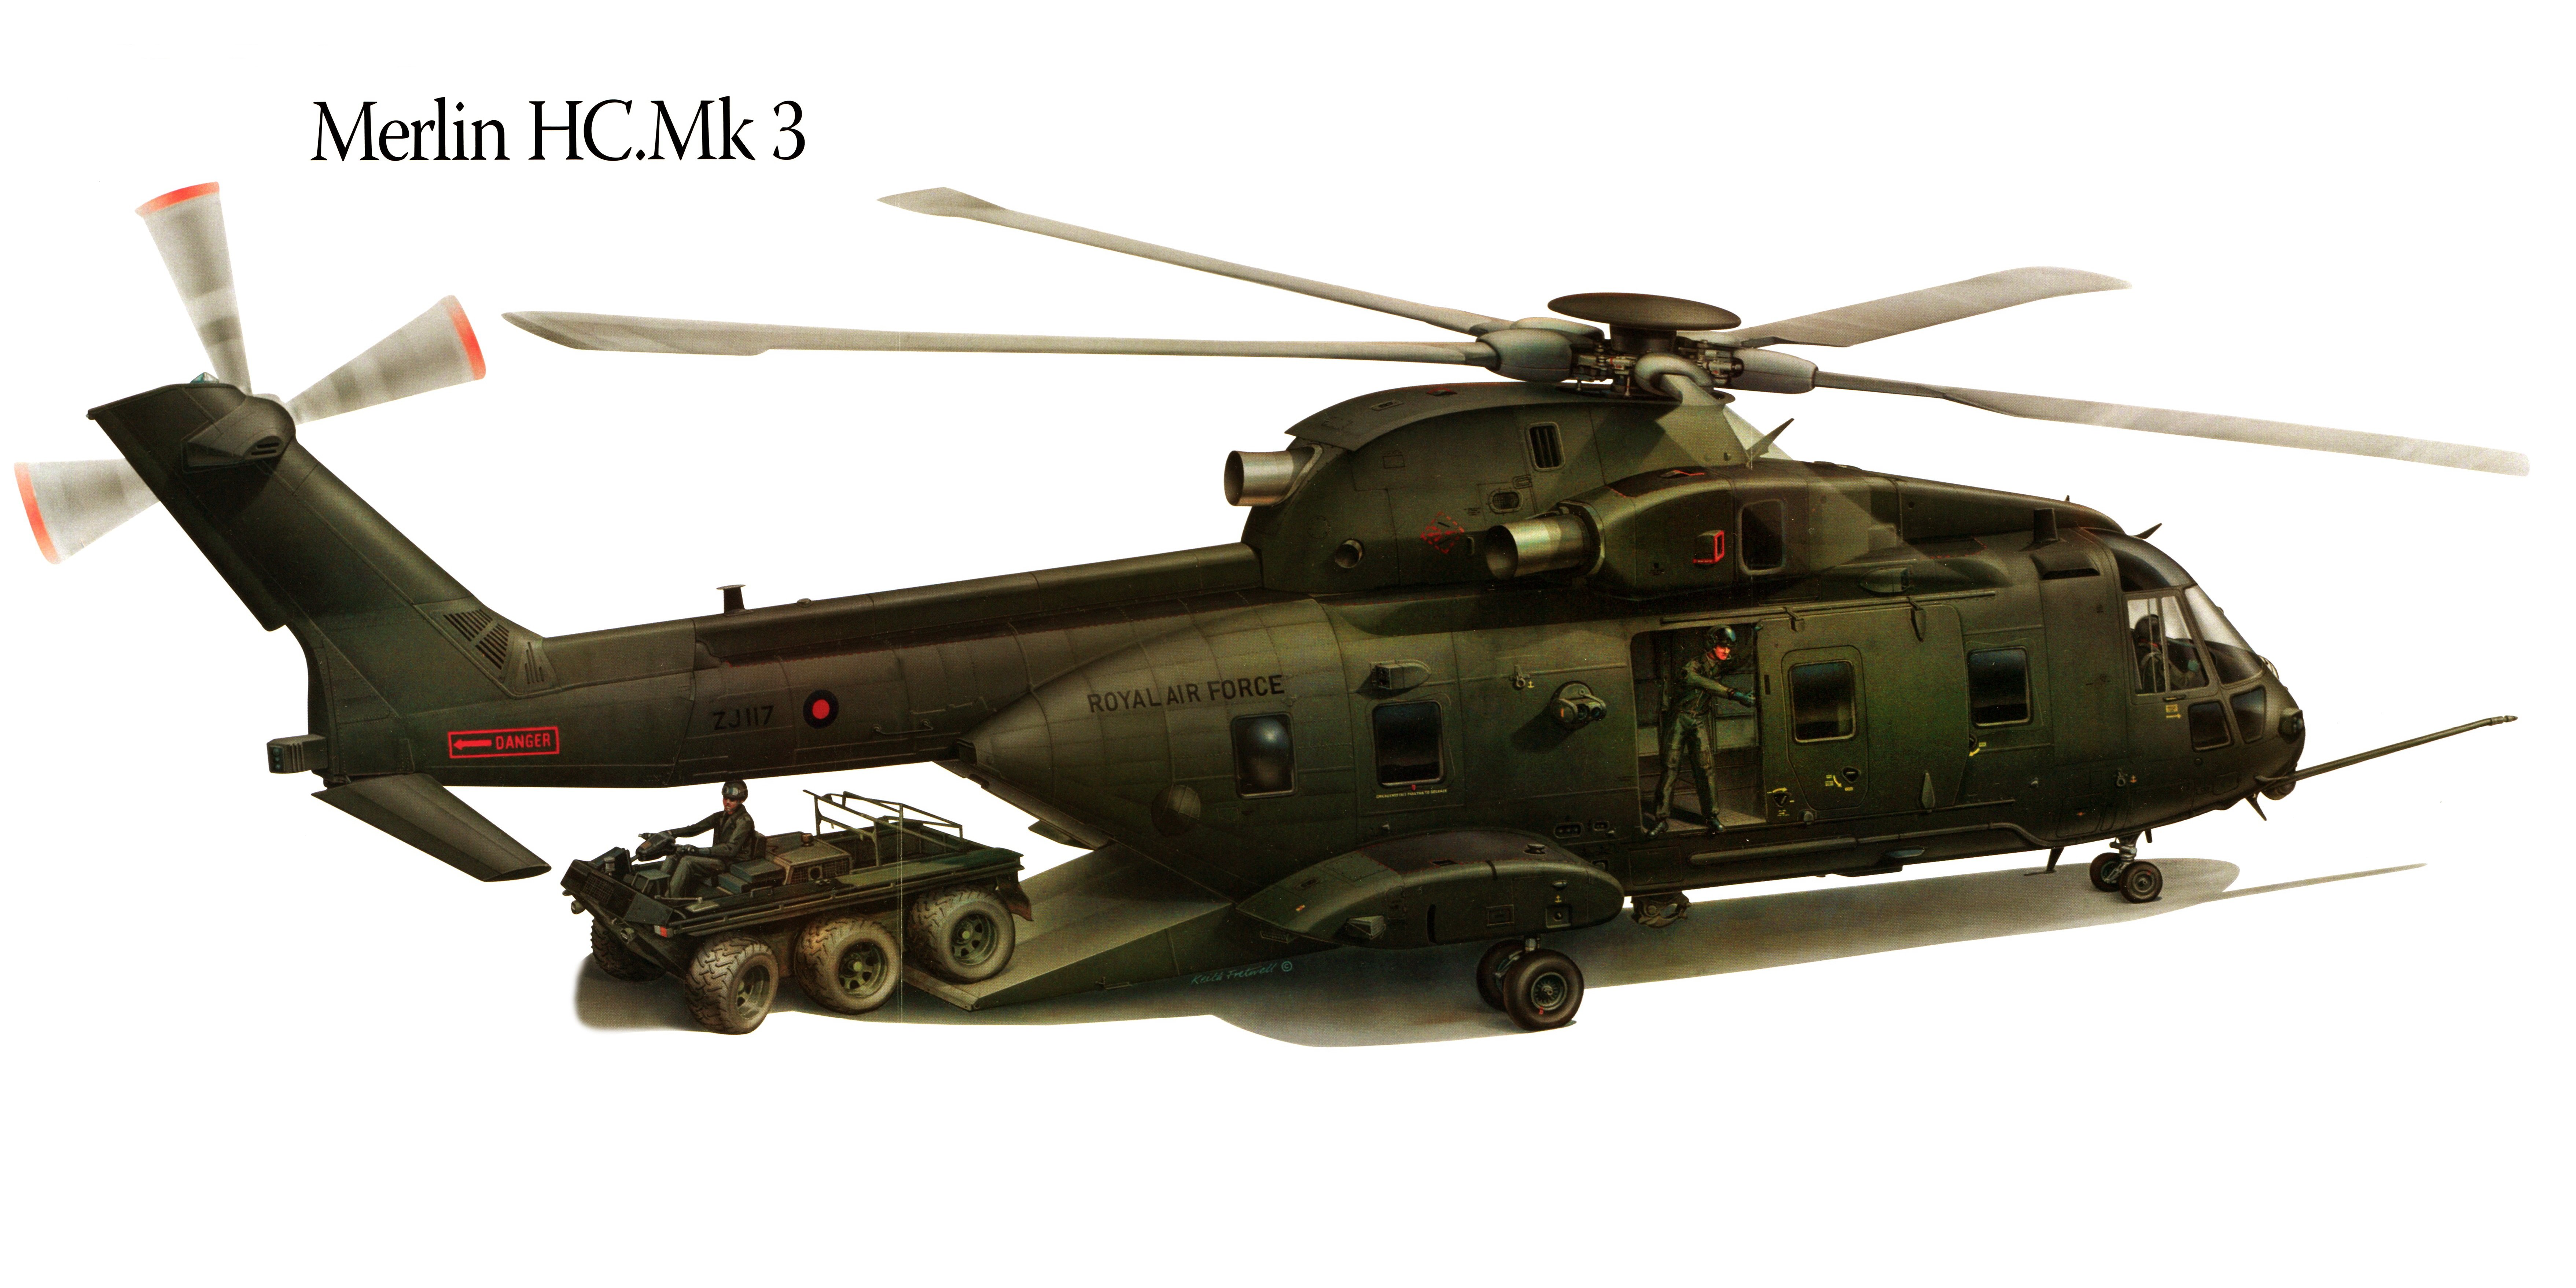 merlin, Hcmk3, Military, Helicopter, Aircraft Wallpaper